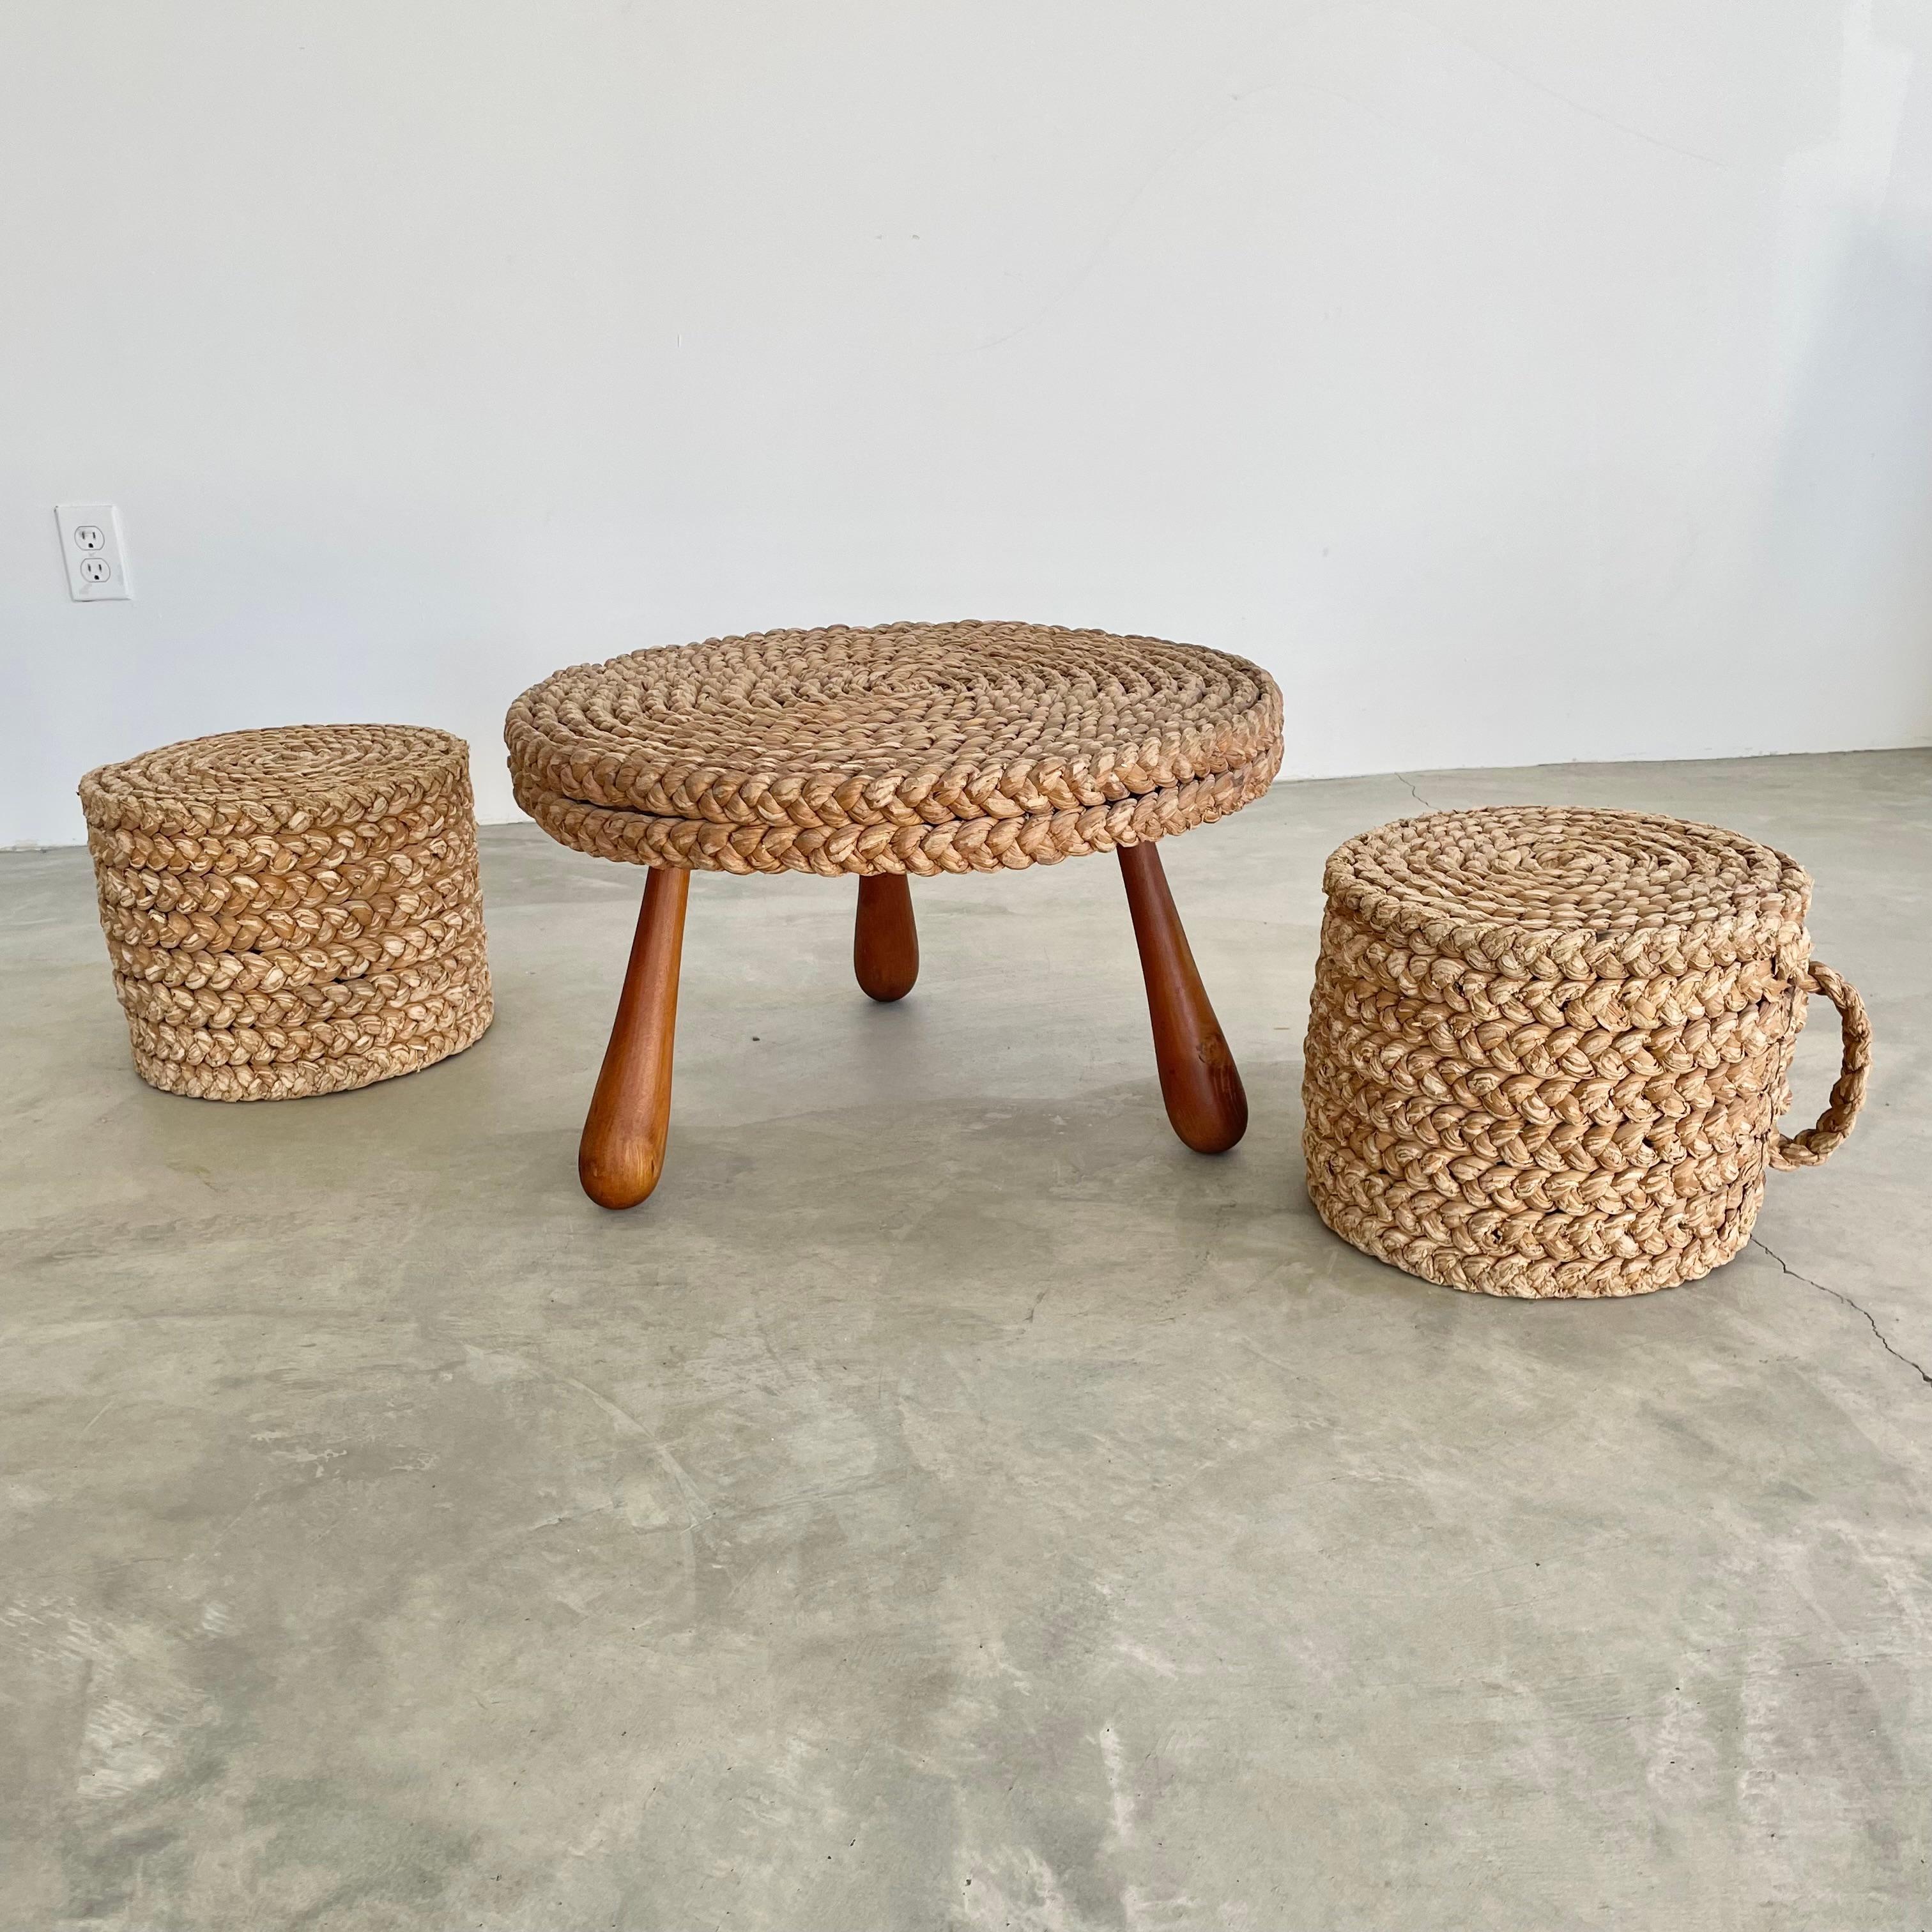 Rope and Wood Table with Two Nesting Stools, 1960s France In Good Condition For Sale In Los Angeles, CA